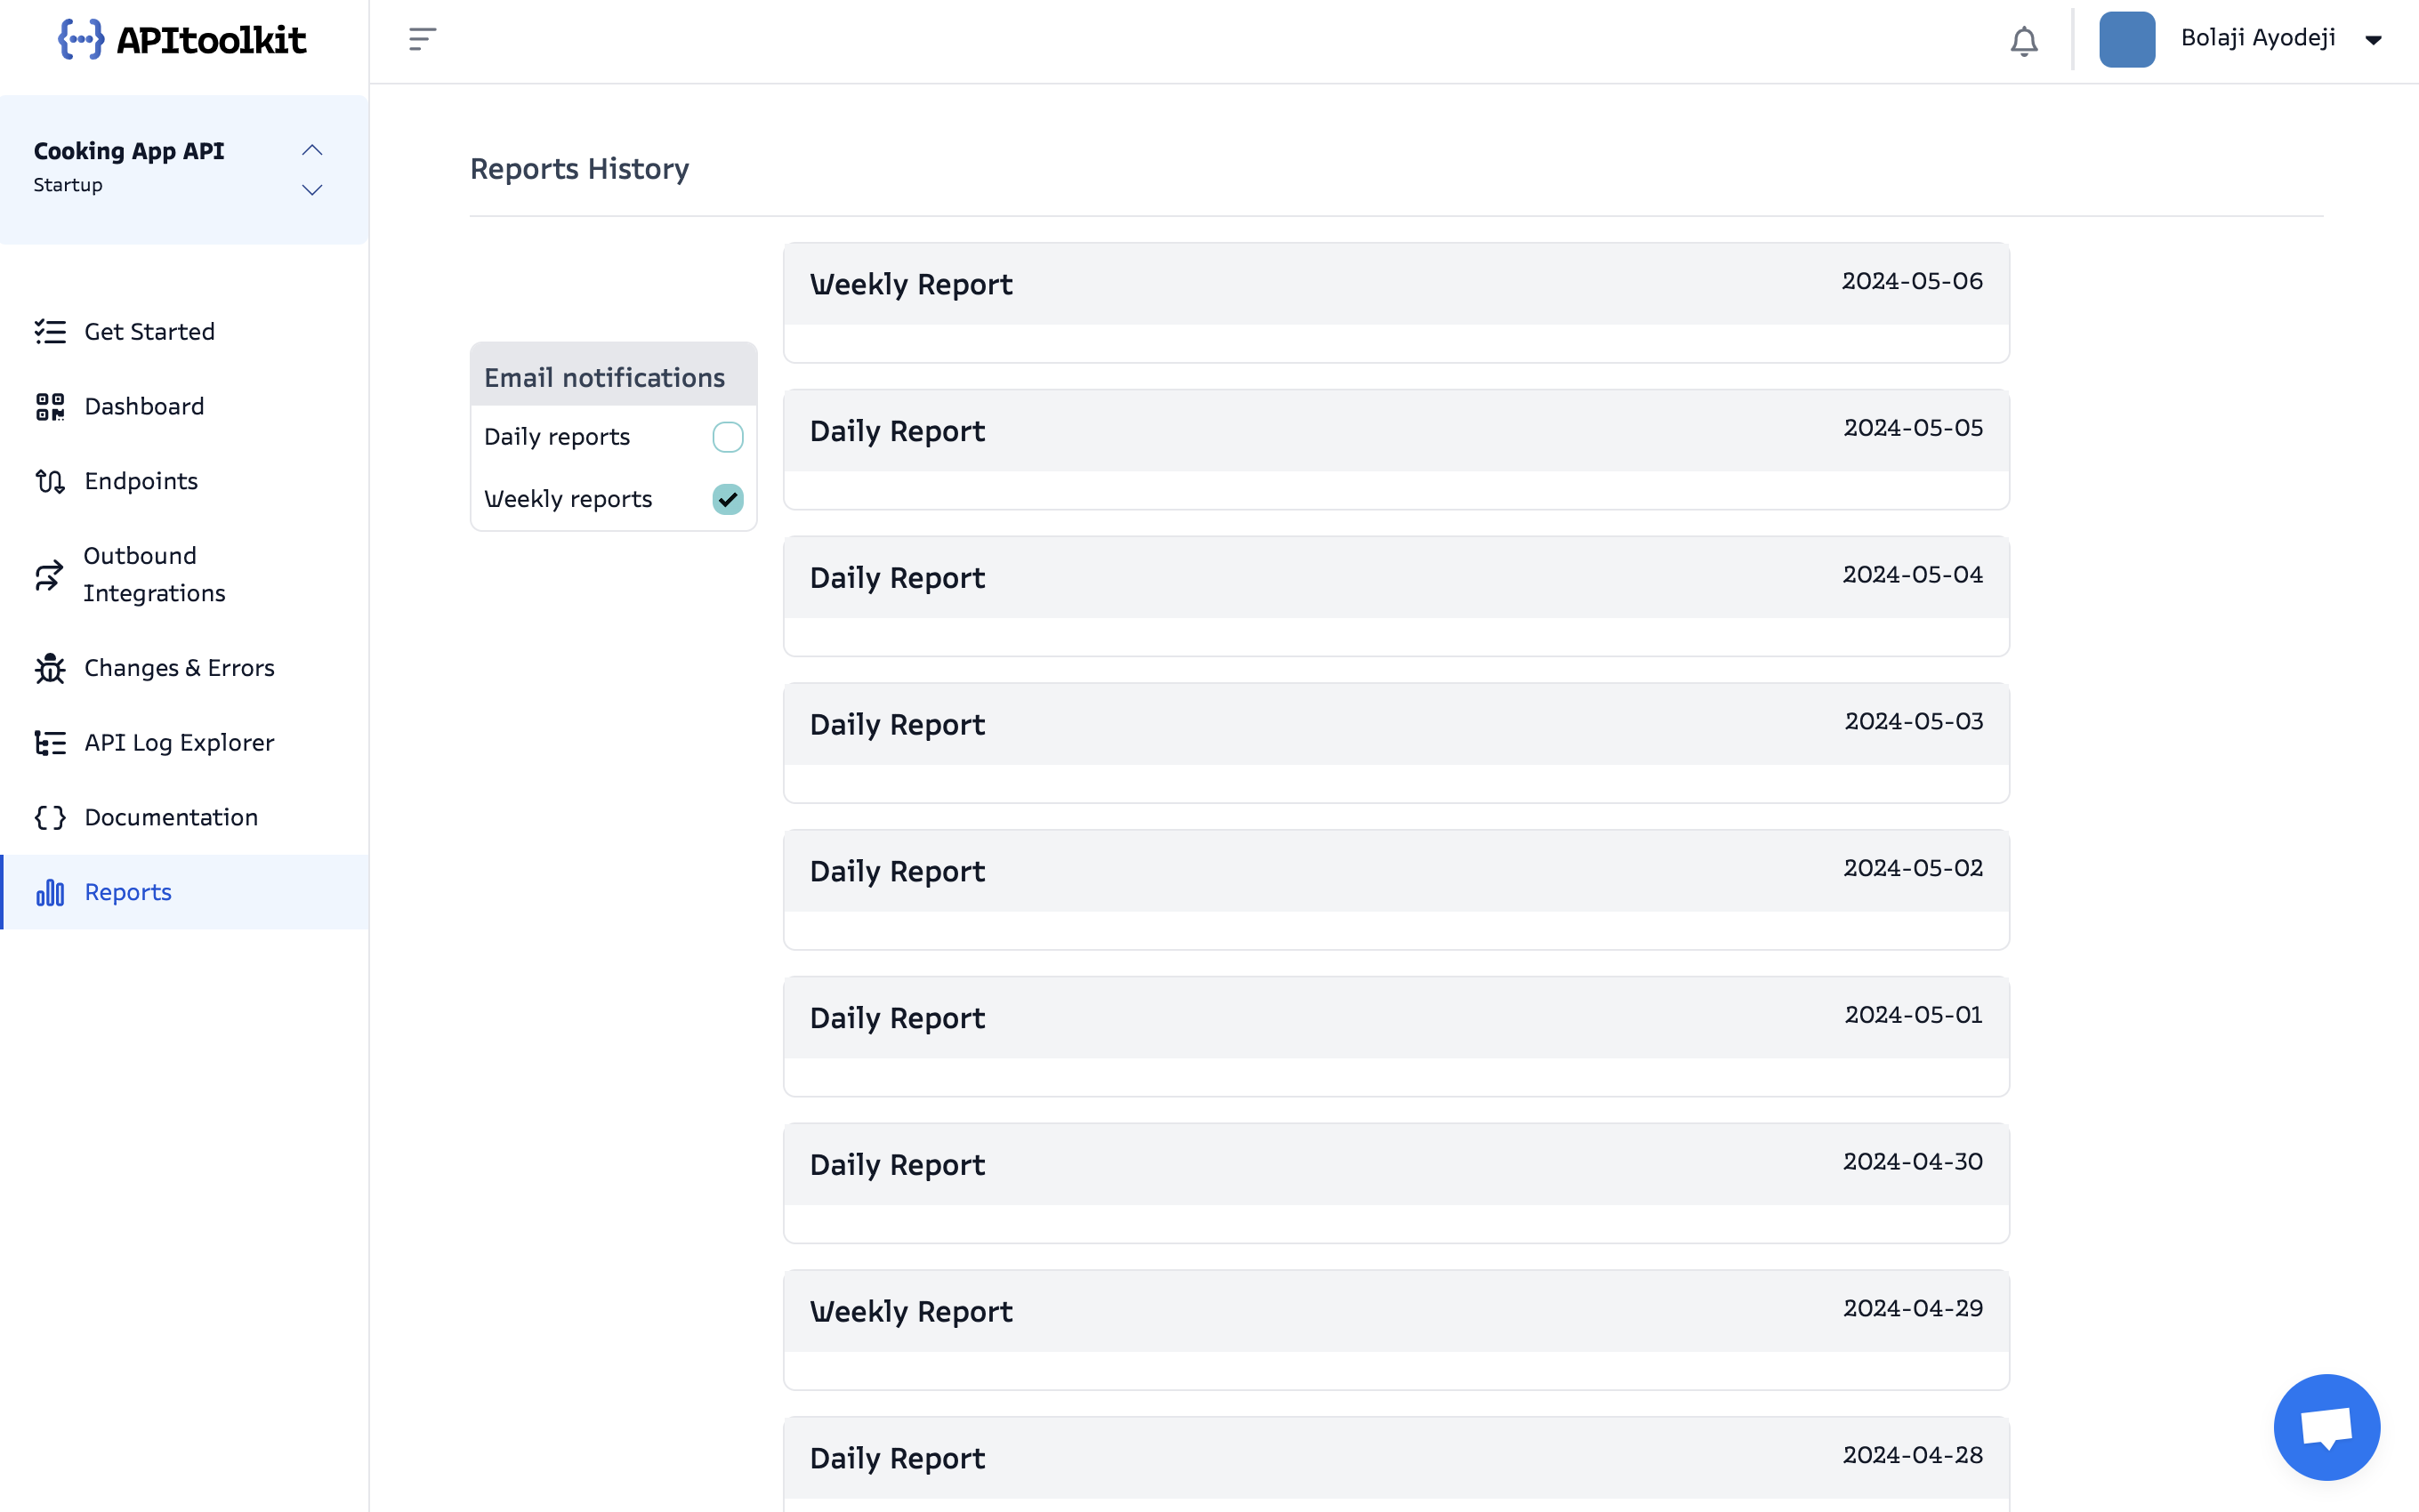 Screenshot of APItoolkit's report page